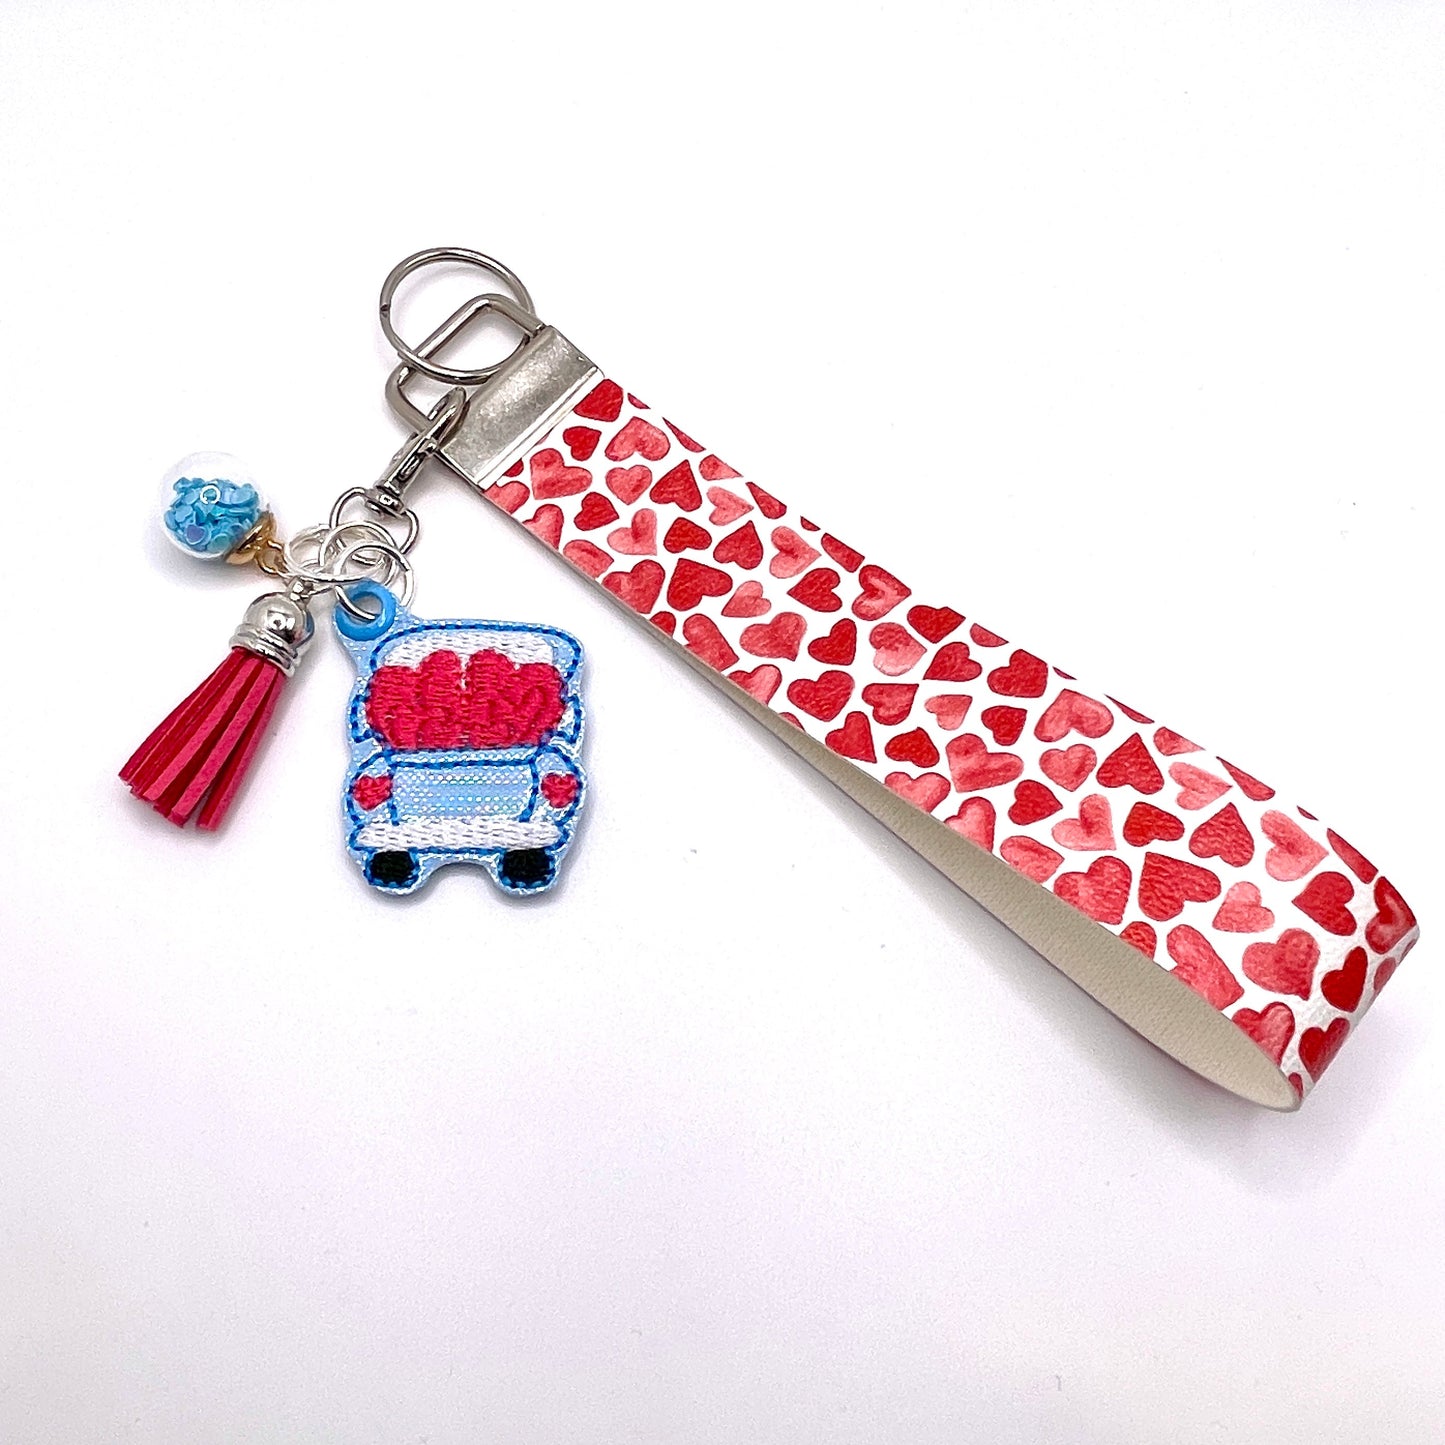 Blue Truck Keychain with Heart Wristlet | 3 Blue Pineapples